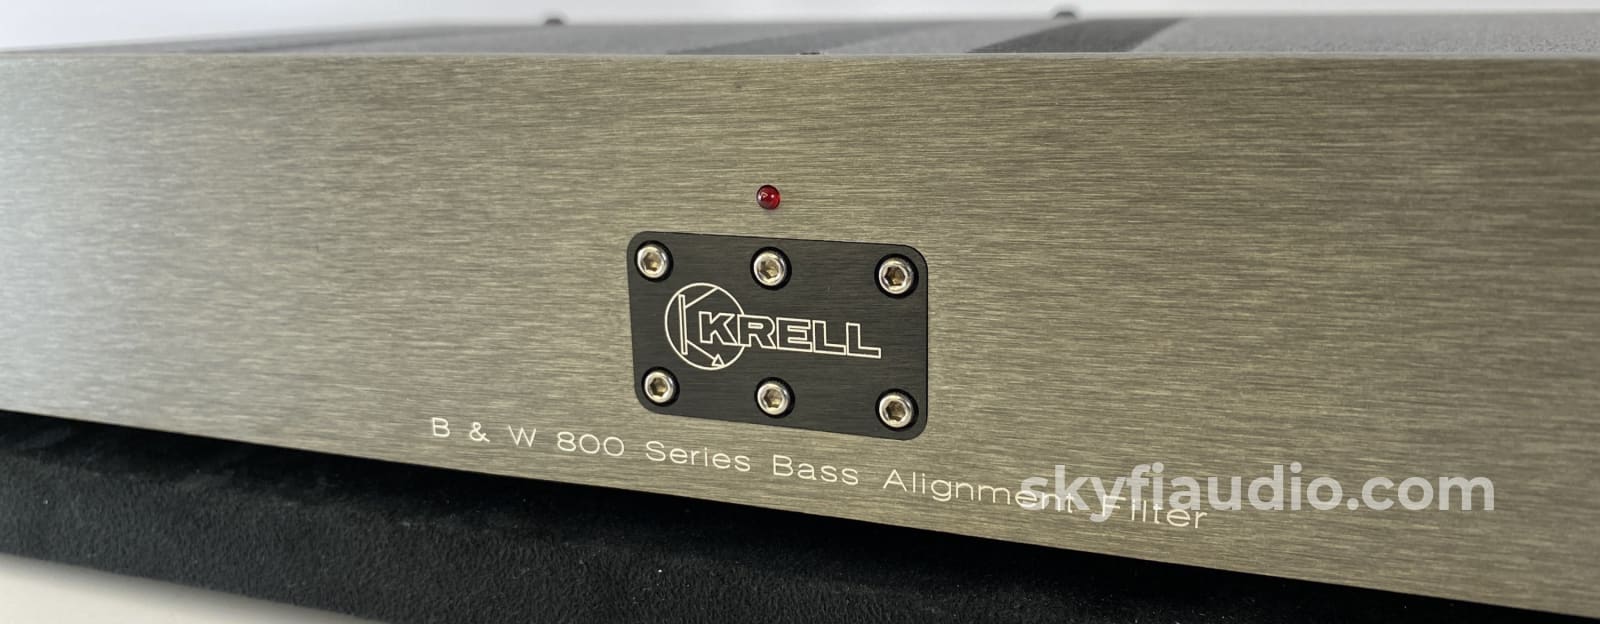 Krell Bass Alignment Filter For B&W 800 Series Speakers - Super Rare! Accessory